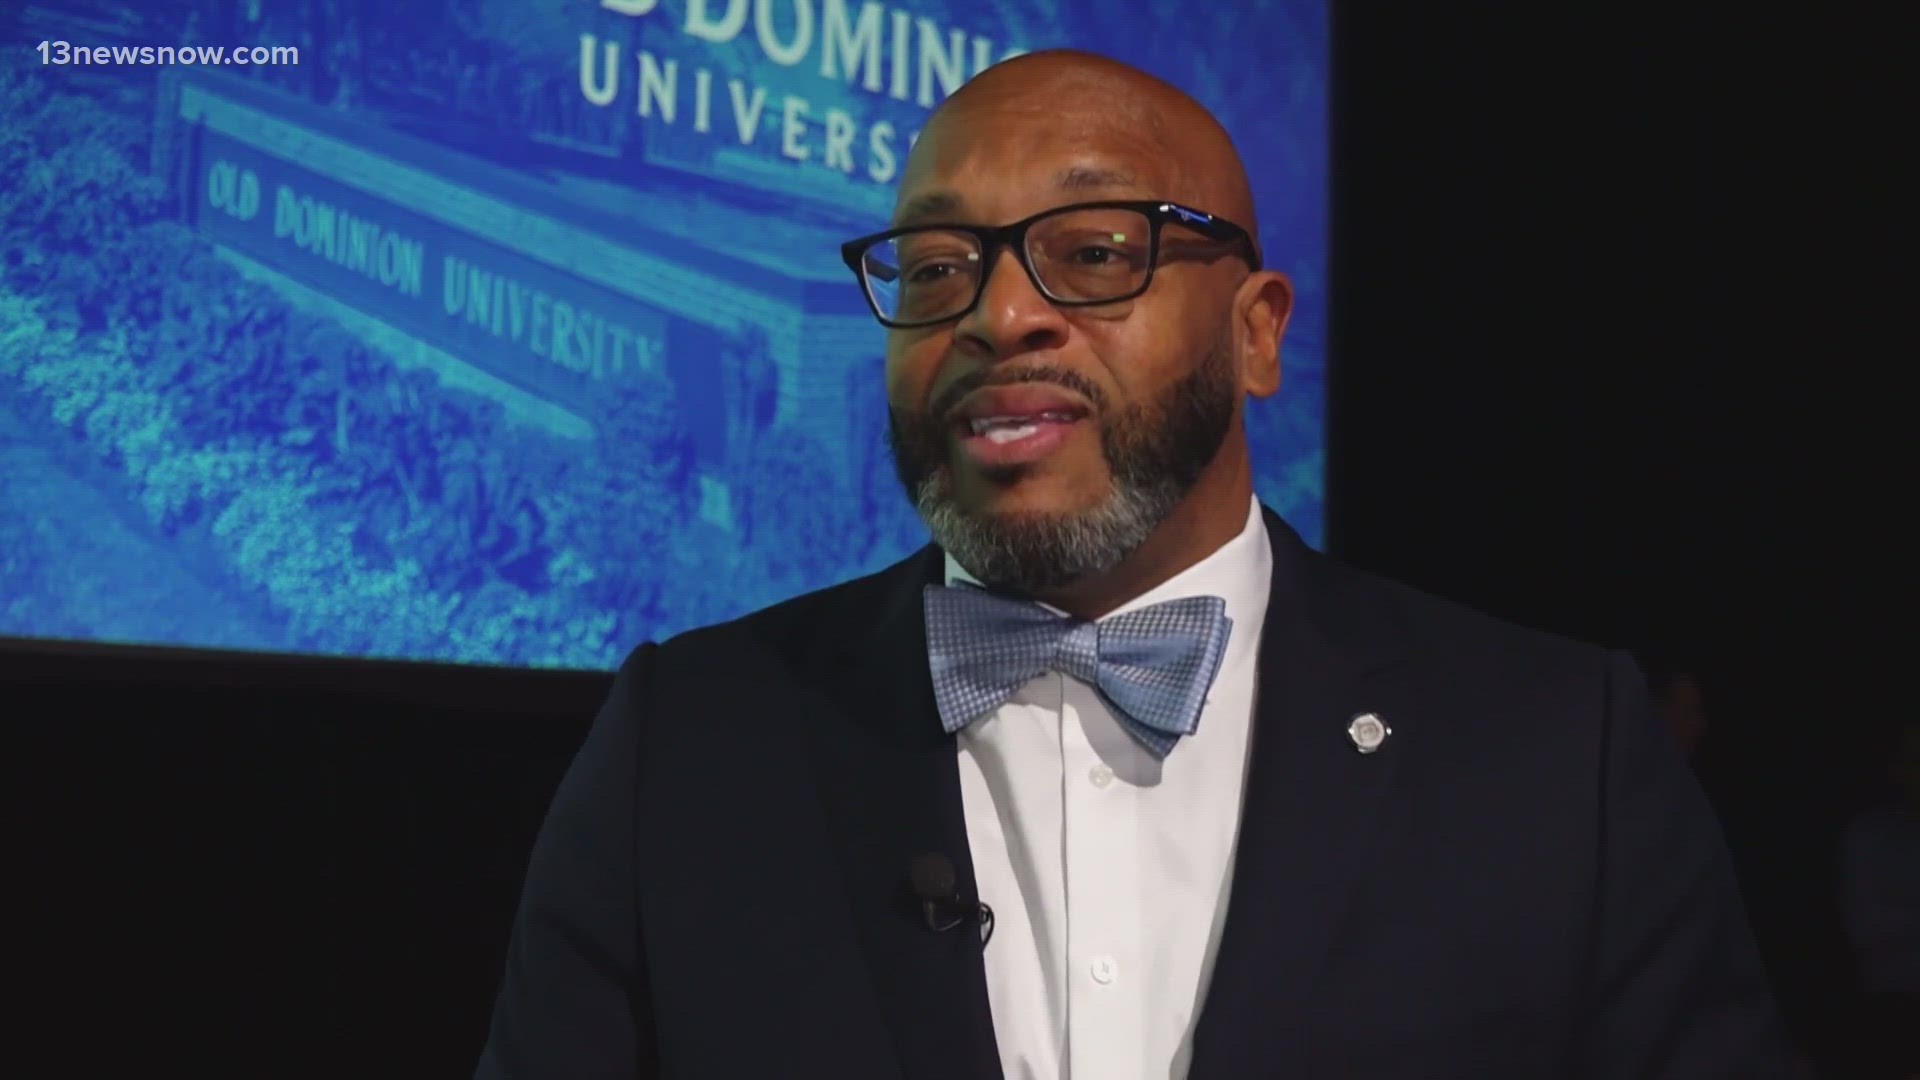 The President of Old Dominion University says the institution is "stronger than ever."